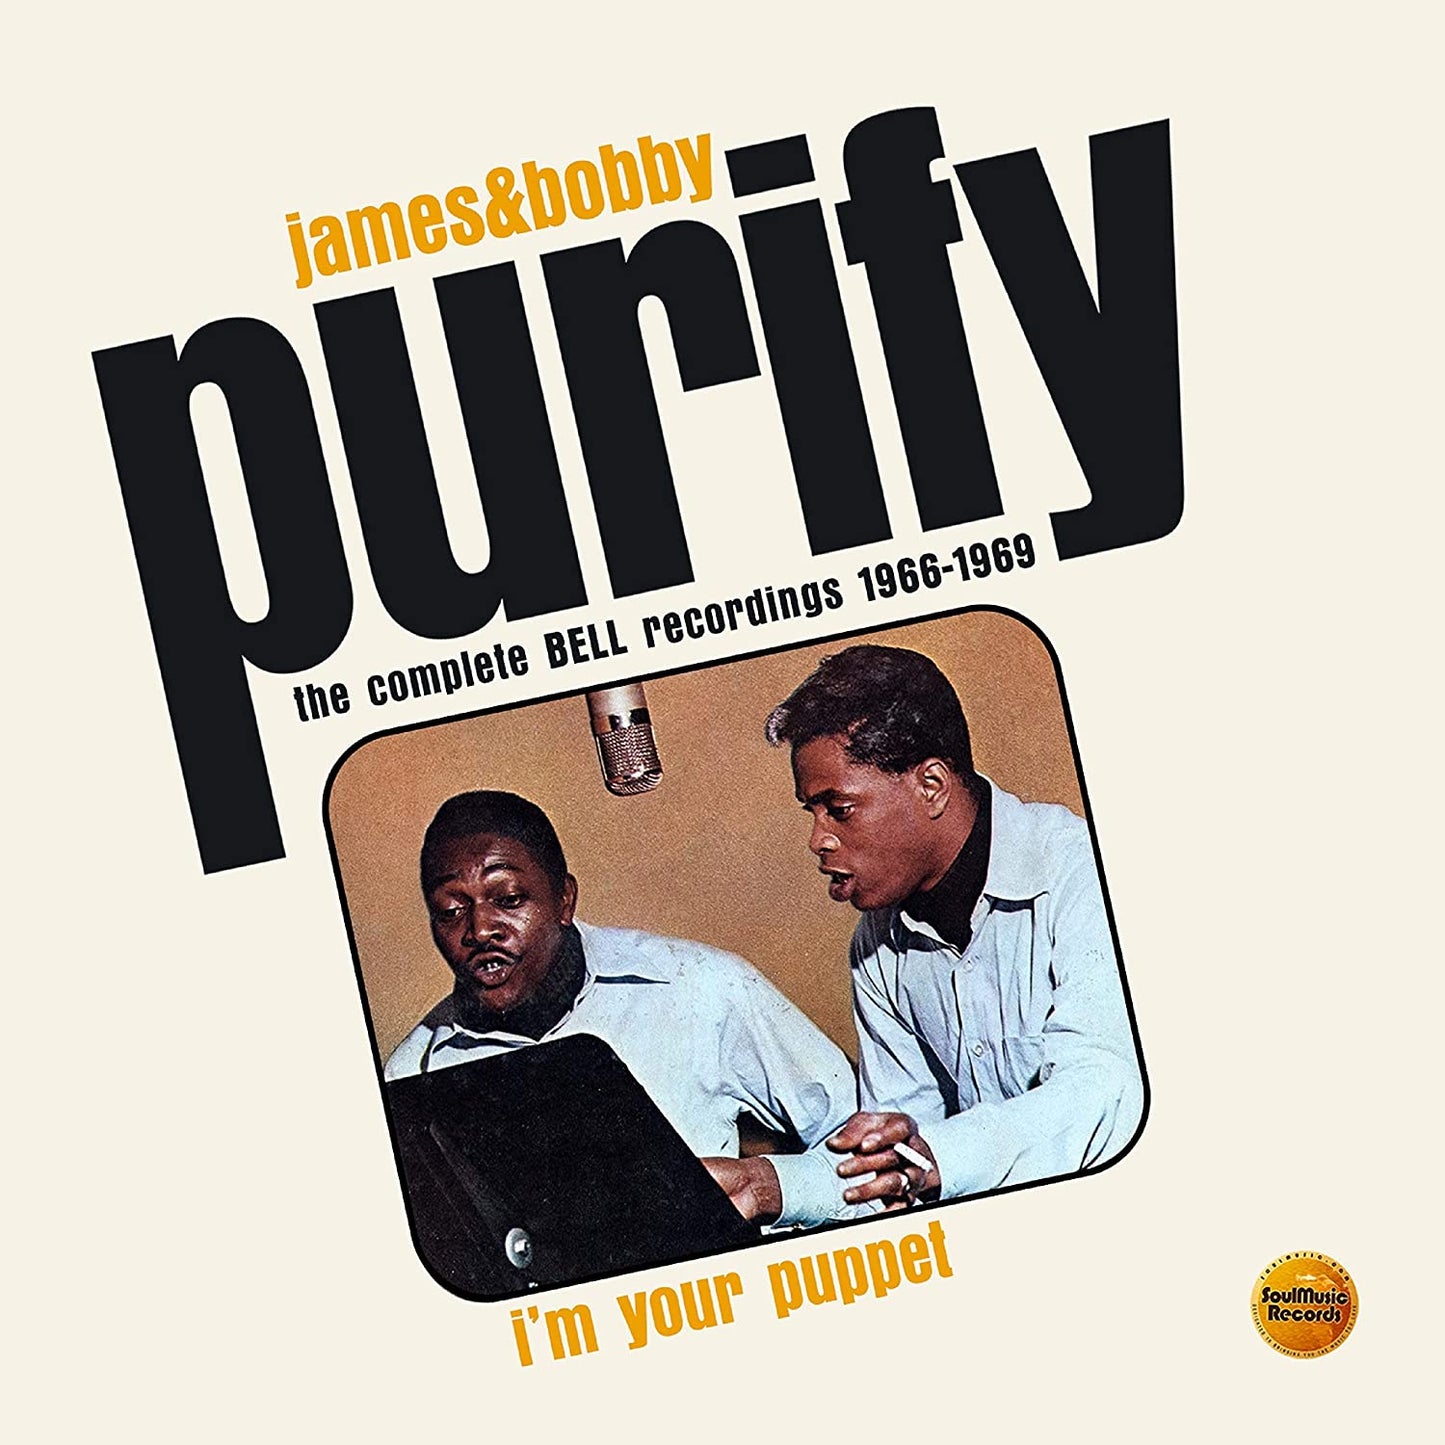 Purify, James & Bobby/I'm Your Puppet: The Complete Bell Recordings 1966 [CD]